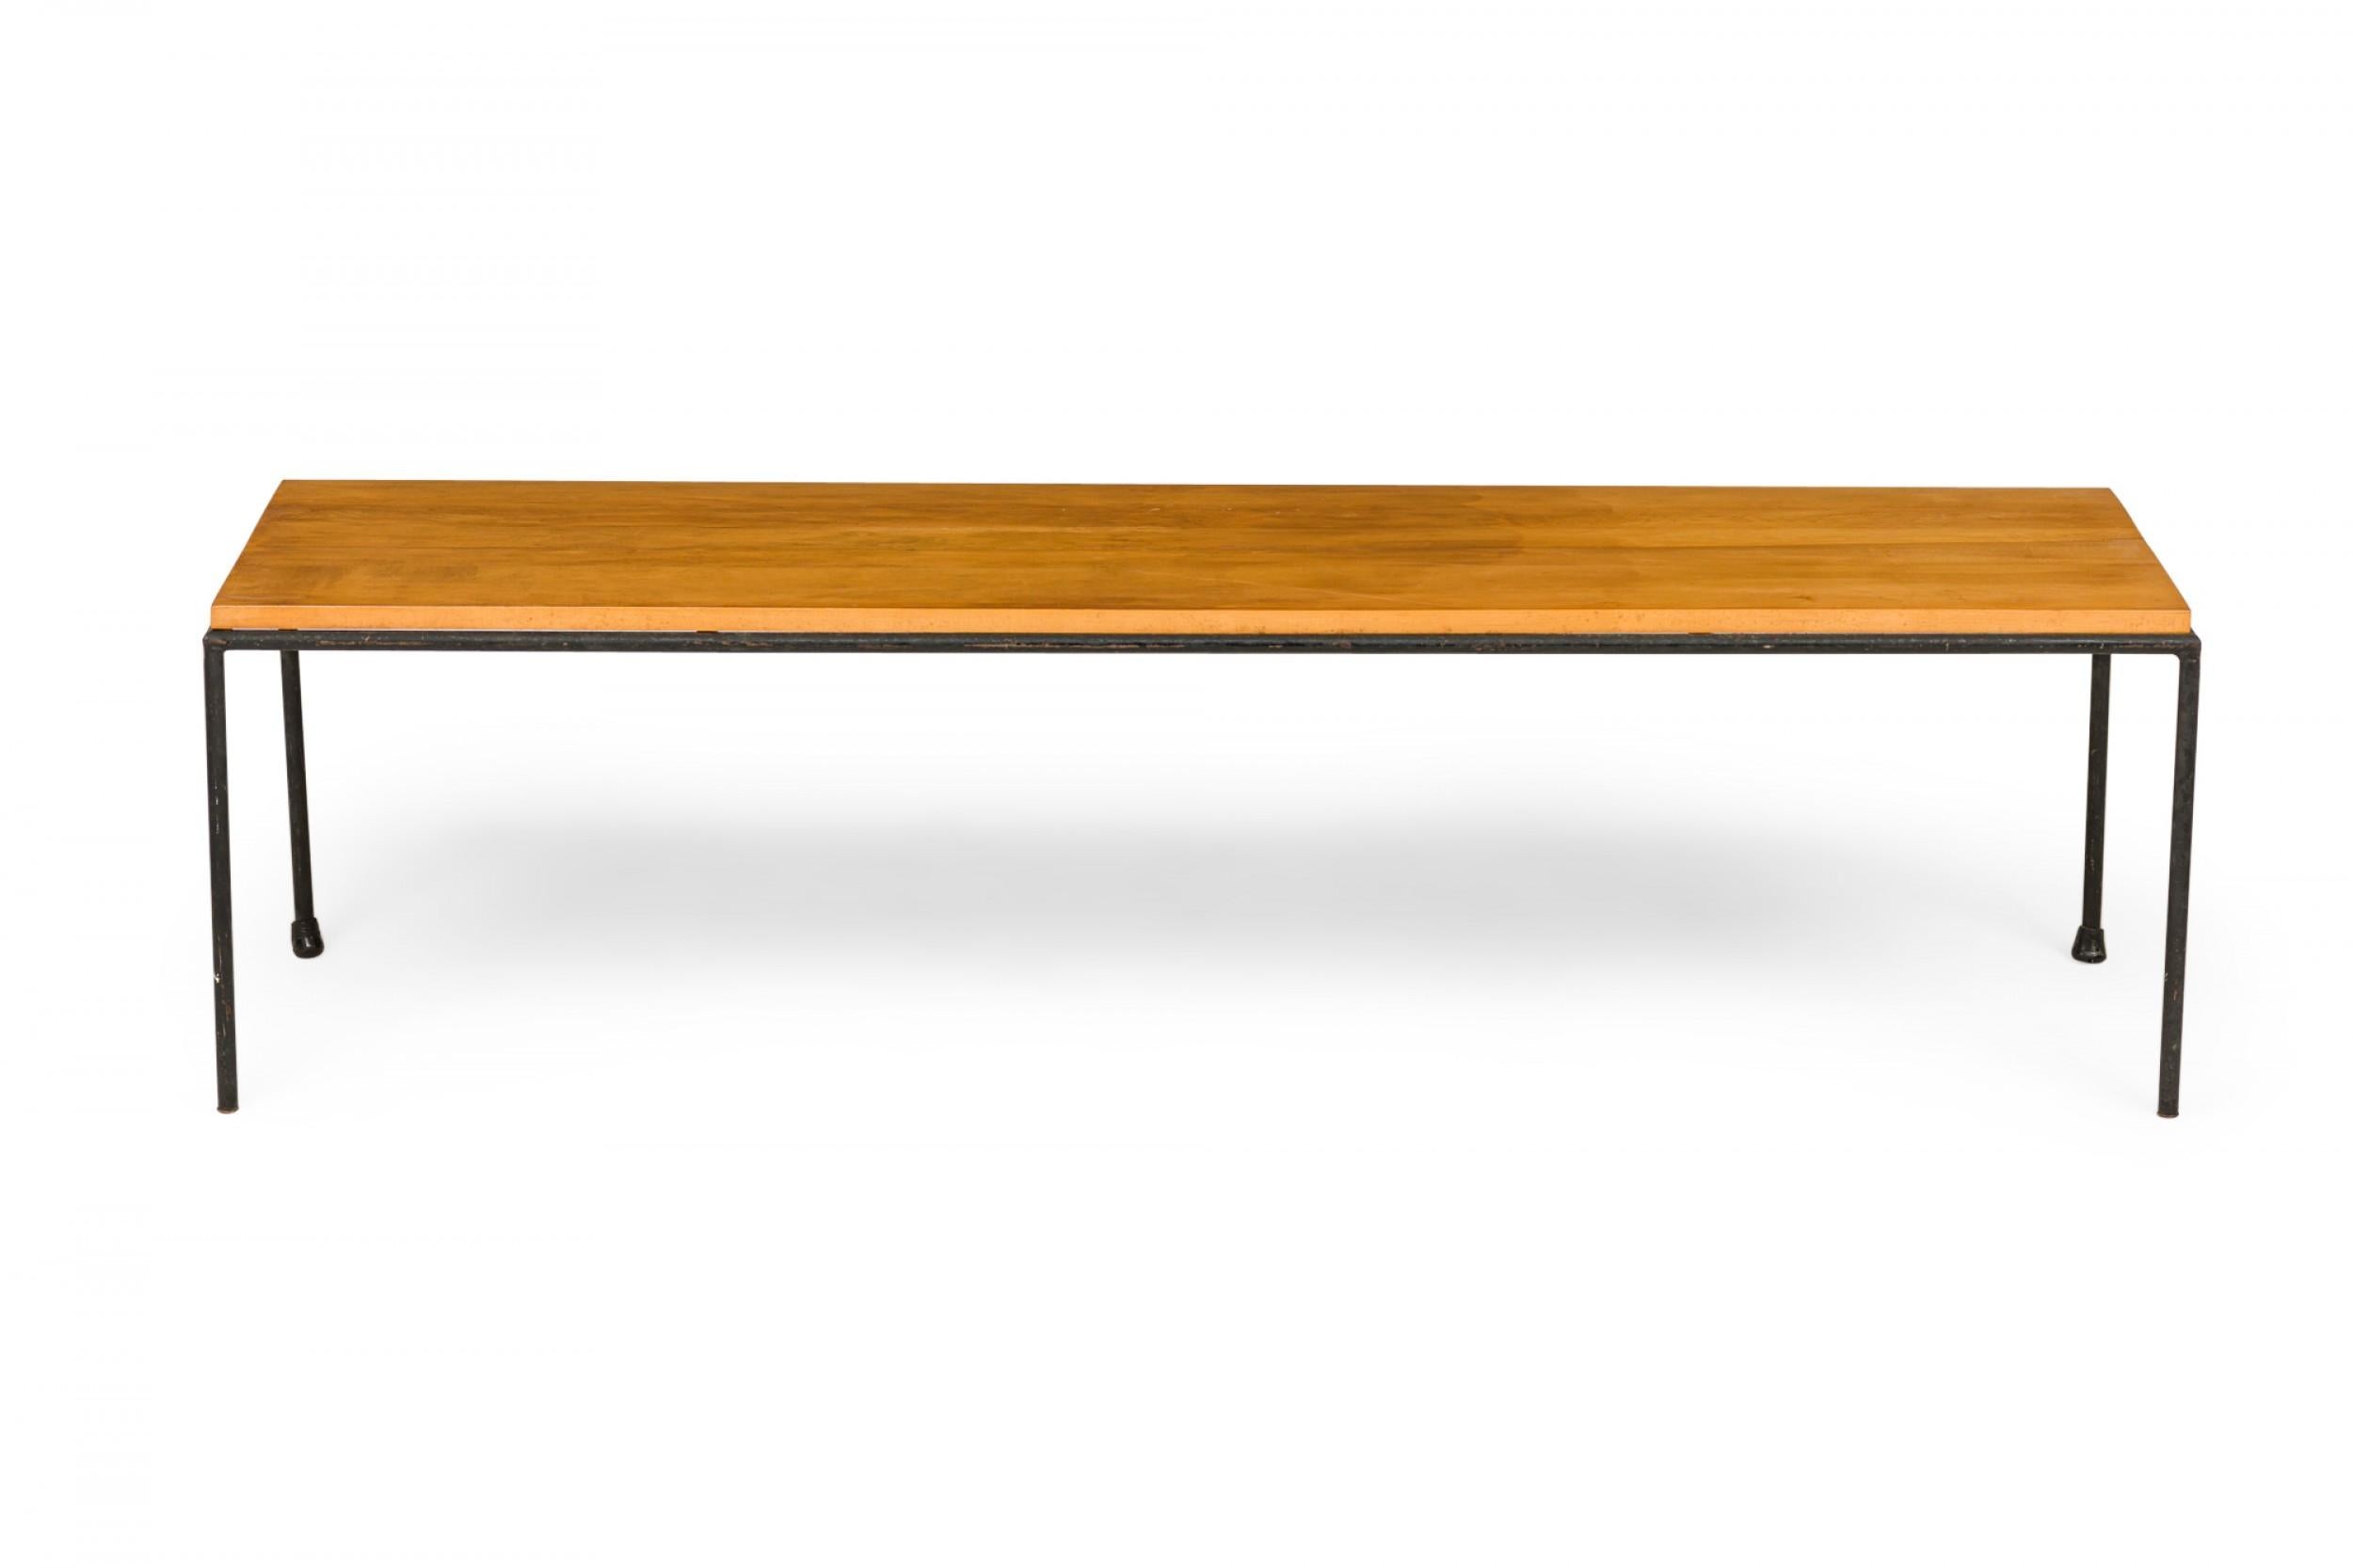 Paul McCobb for Winchendon 'Planner' Wood and Iron Coffee Table / Bench In Good Condition For Sale In New York, NY